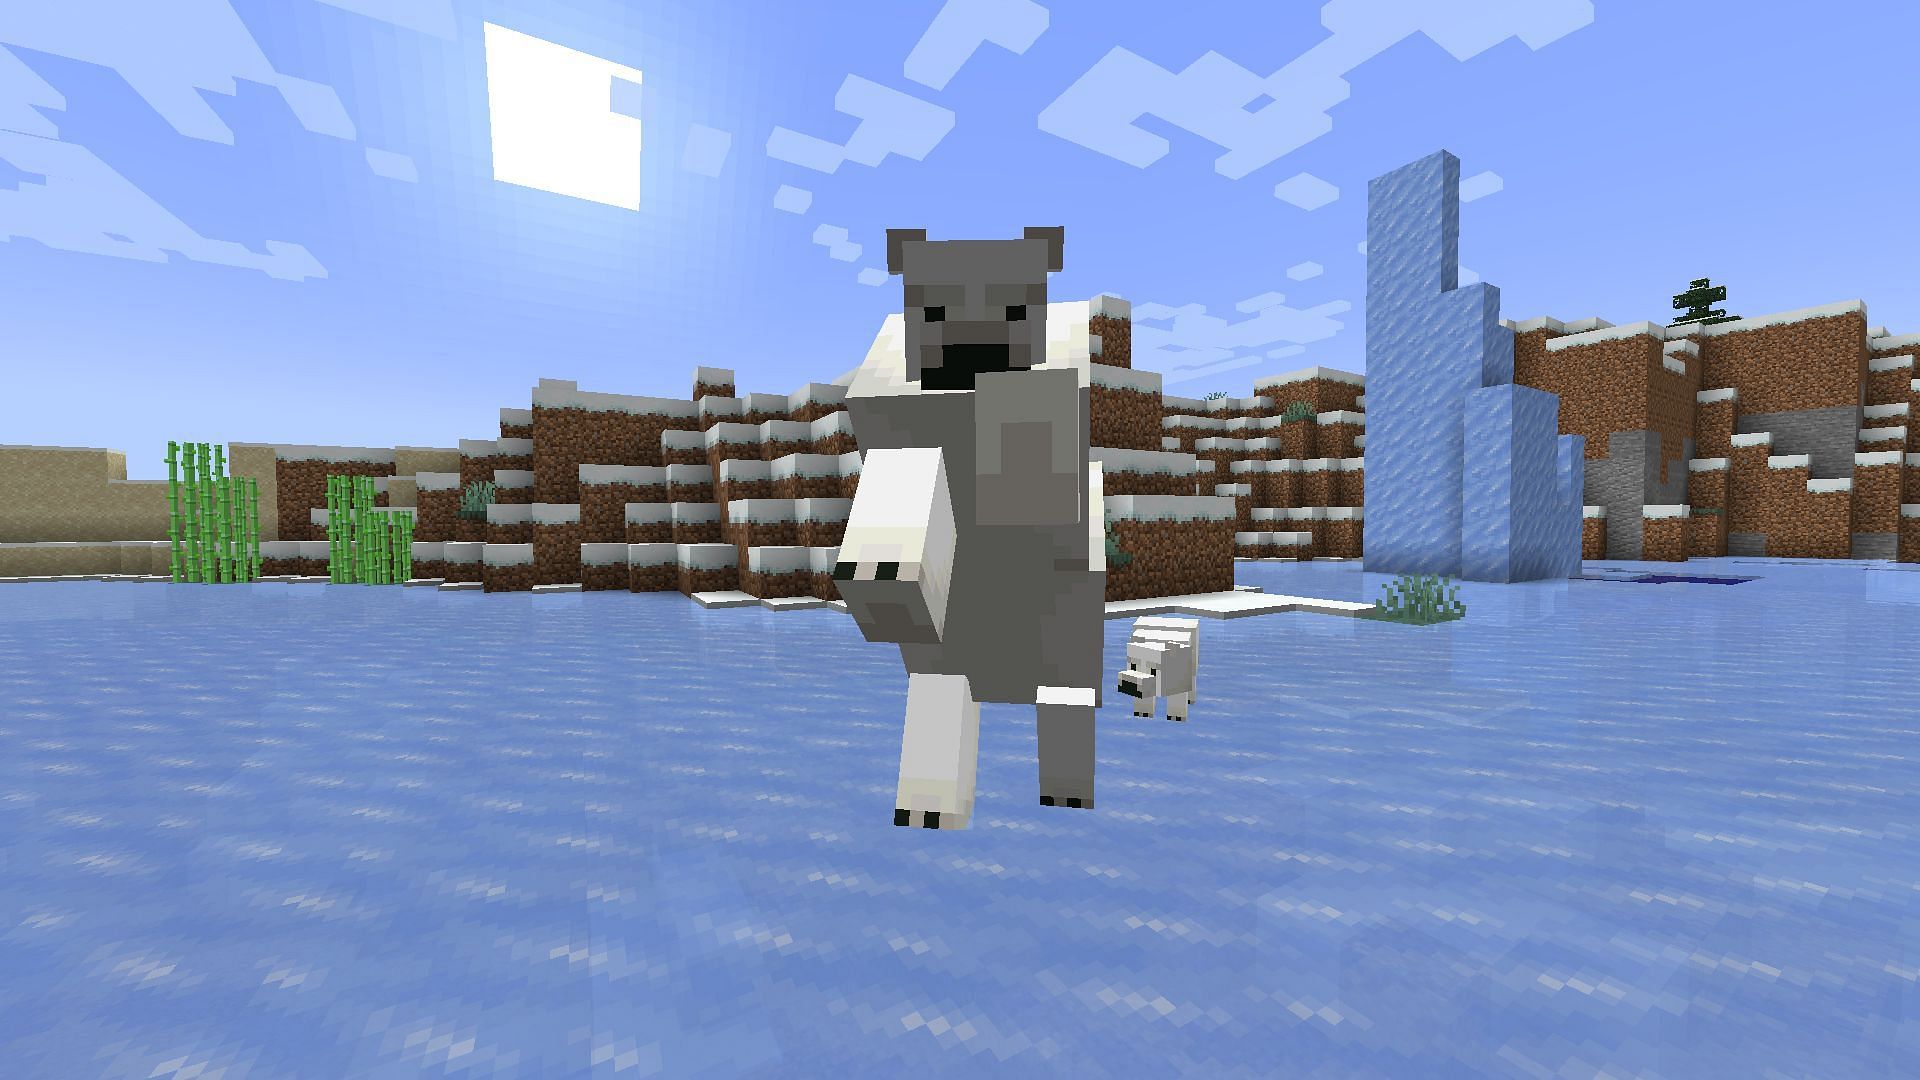 Polar Bear attacking a player by standing on two legs and using forearms in Minecraft (Image via Mojang)